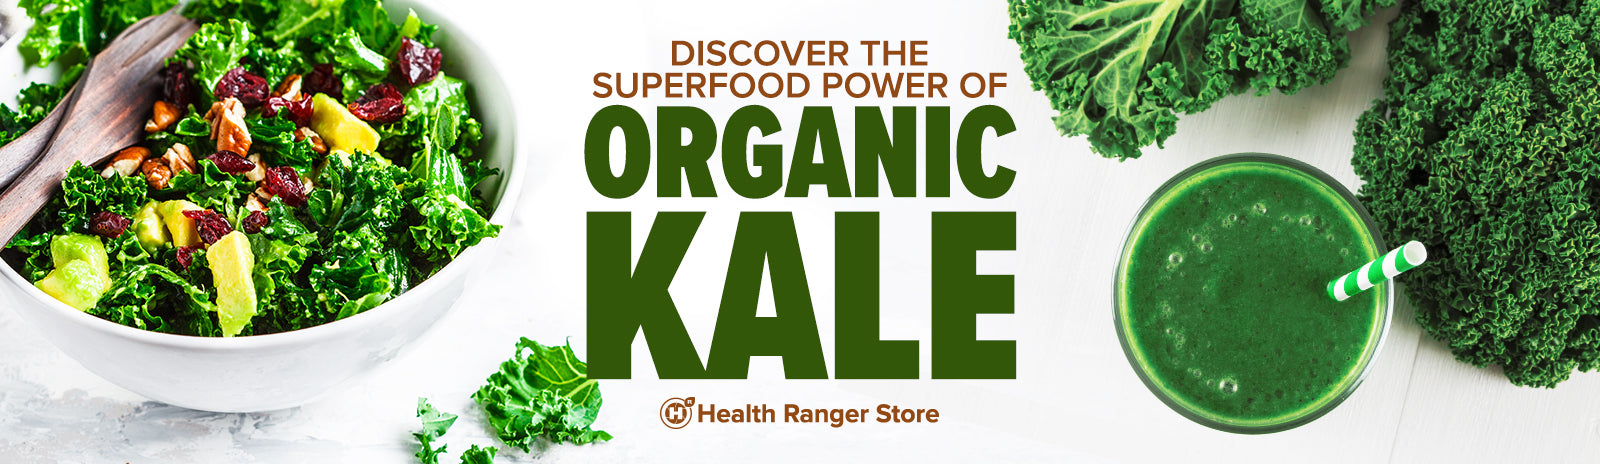 Discover the superfood power of organic kale